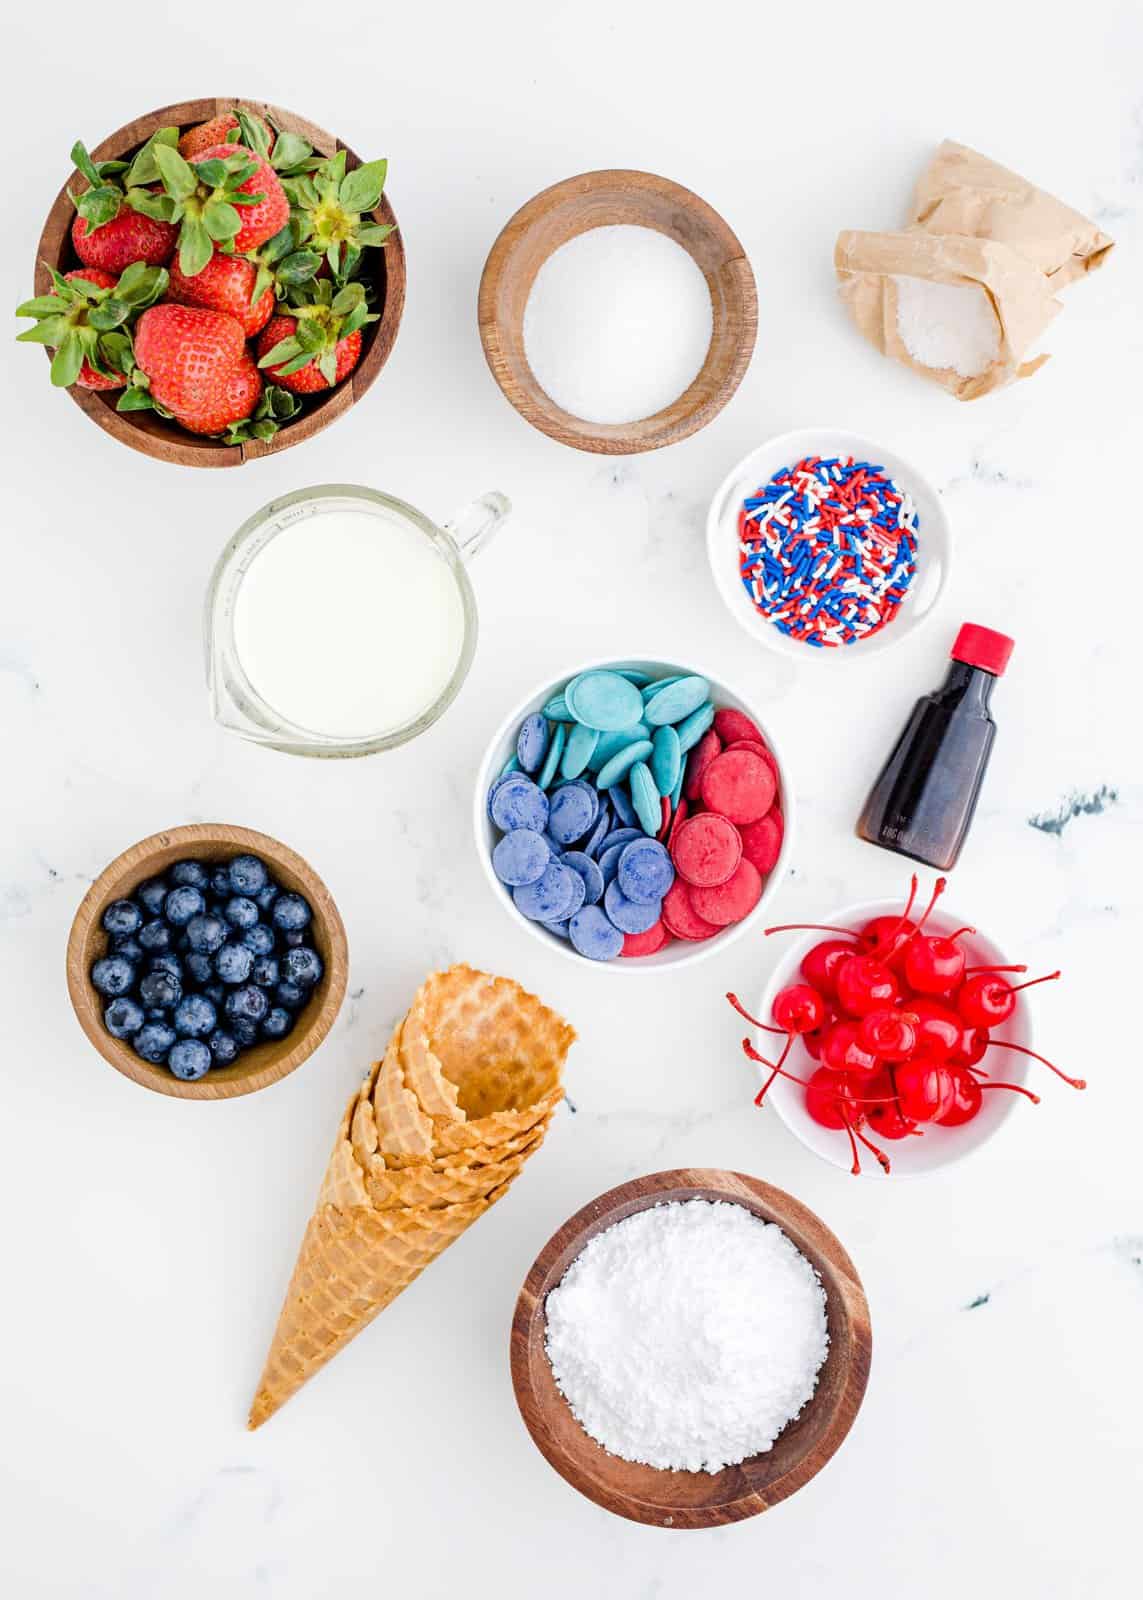 Ingredients needed: waffle cones, red melting candies, blue melting candies, strawberries, blueberries, granulated sugar, heavy cream, powdered sugar, cheesecake pudding mix, vanilla extract, maraschino cherries, red, white and blue sprinkles.